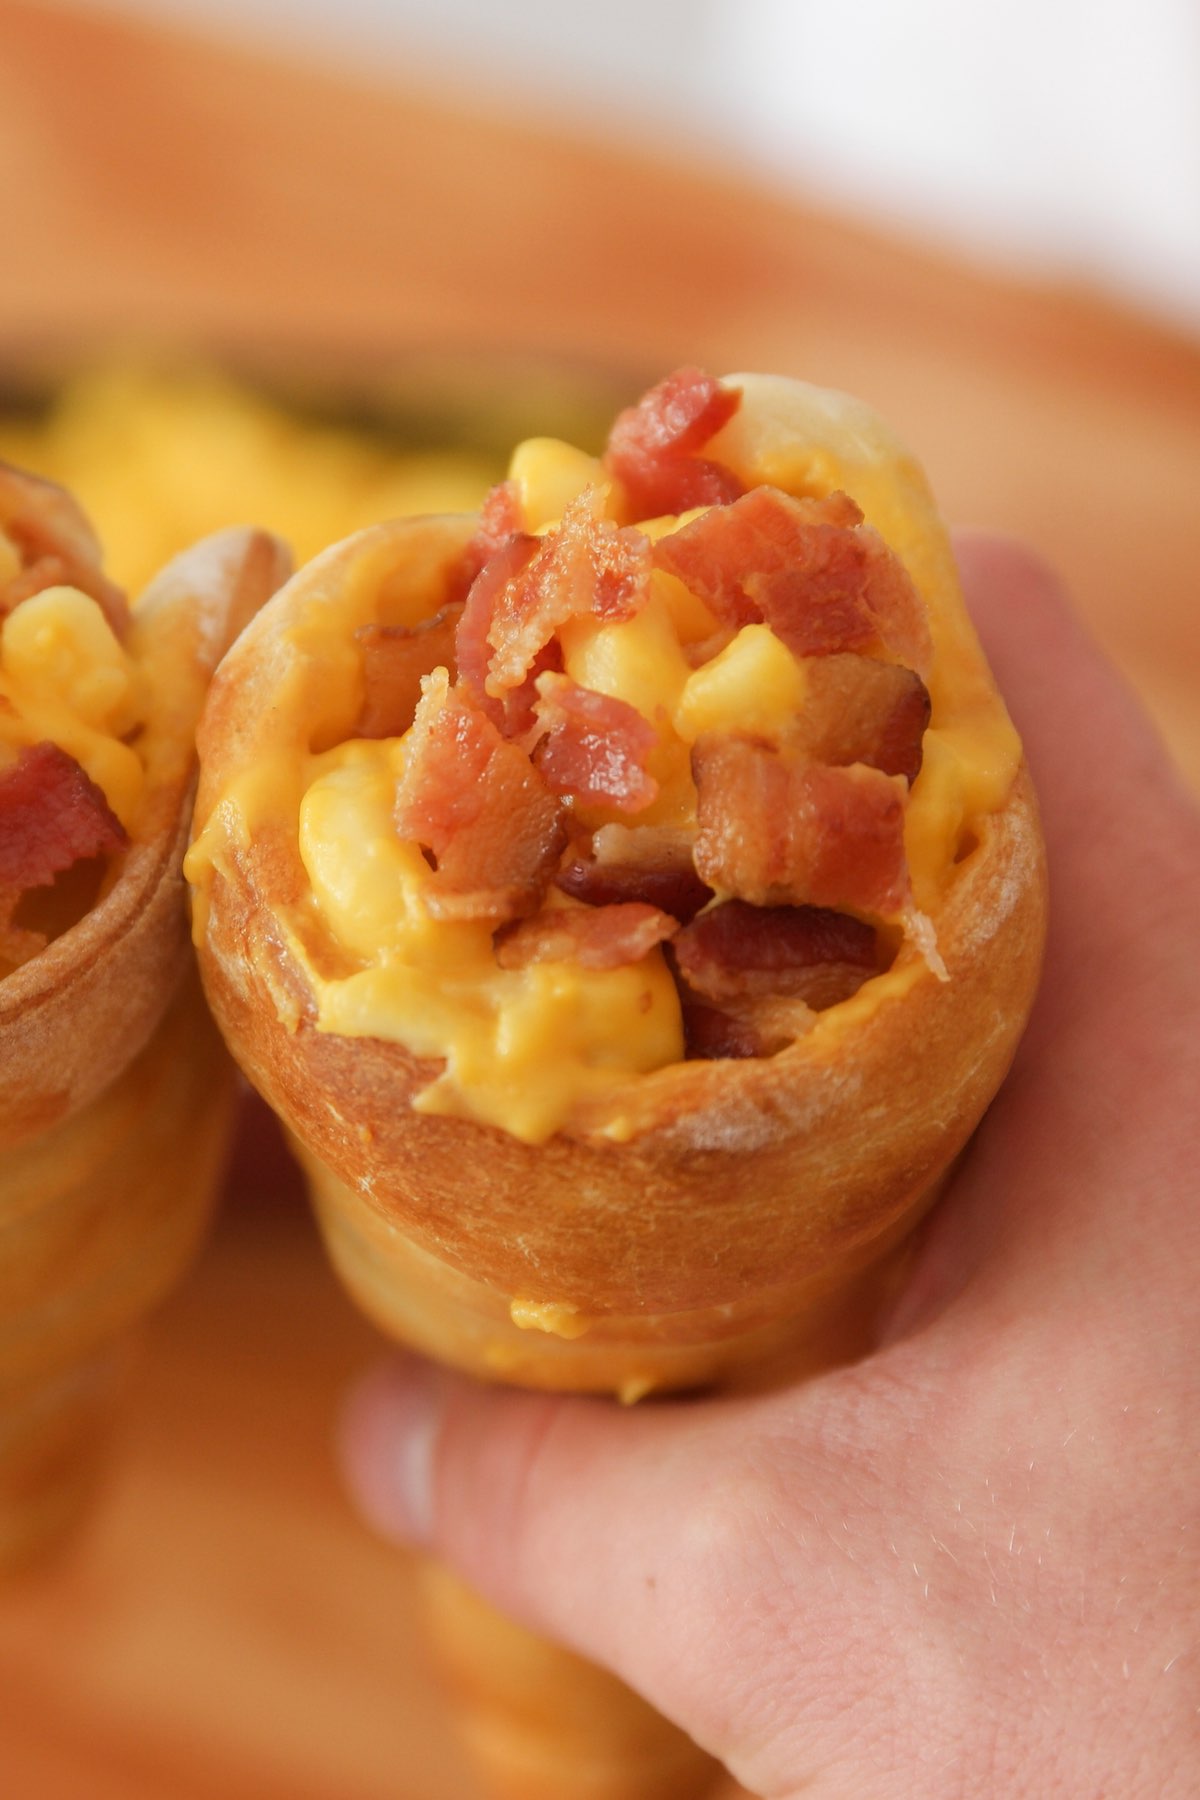 Pizza Cones are pizza dough shaped into cone form and then baked in the oven until golden brown. Add your favorite toppings into the pizza cones and they are a really fun way to eat pizza!